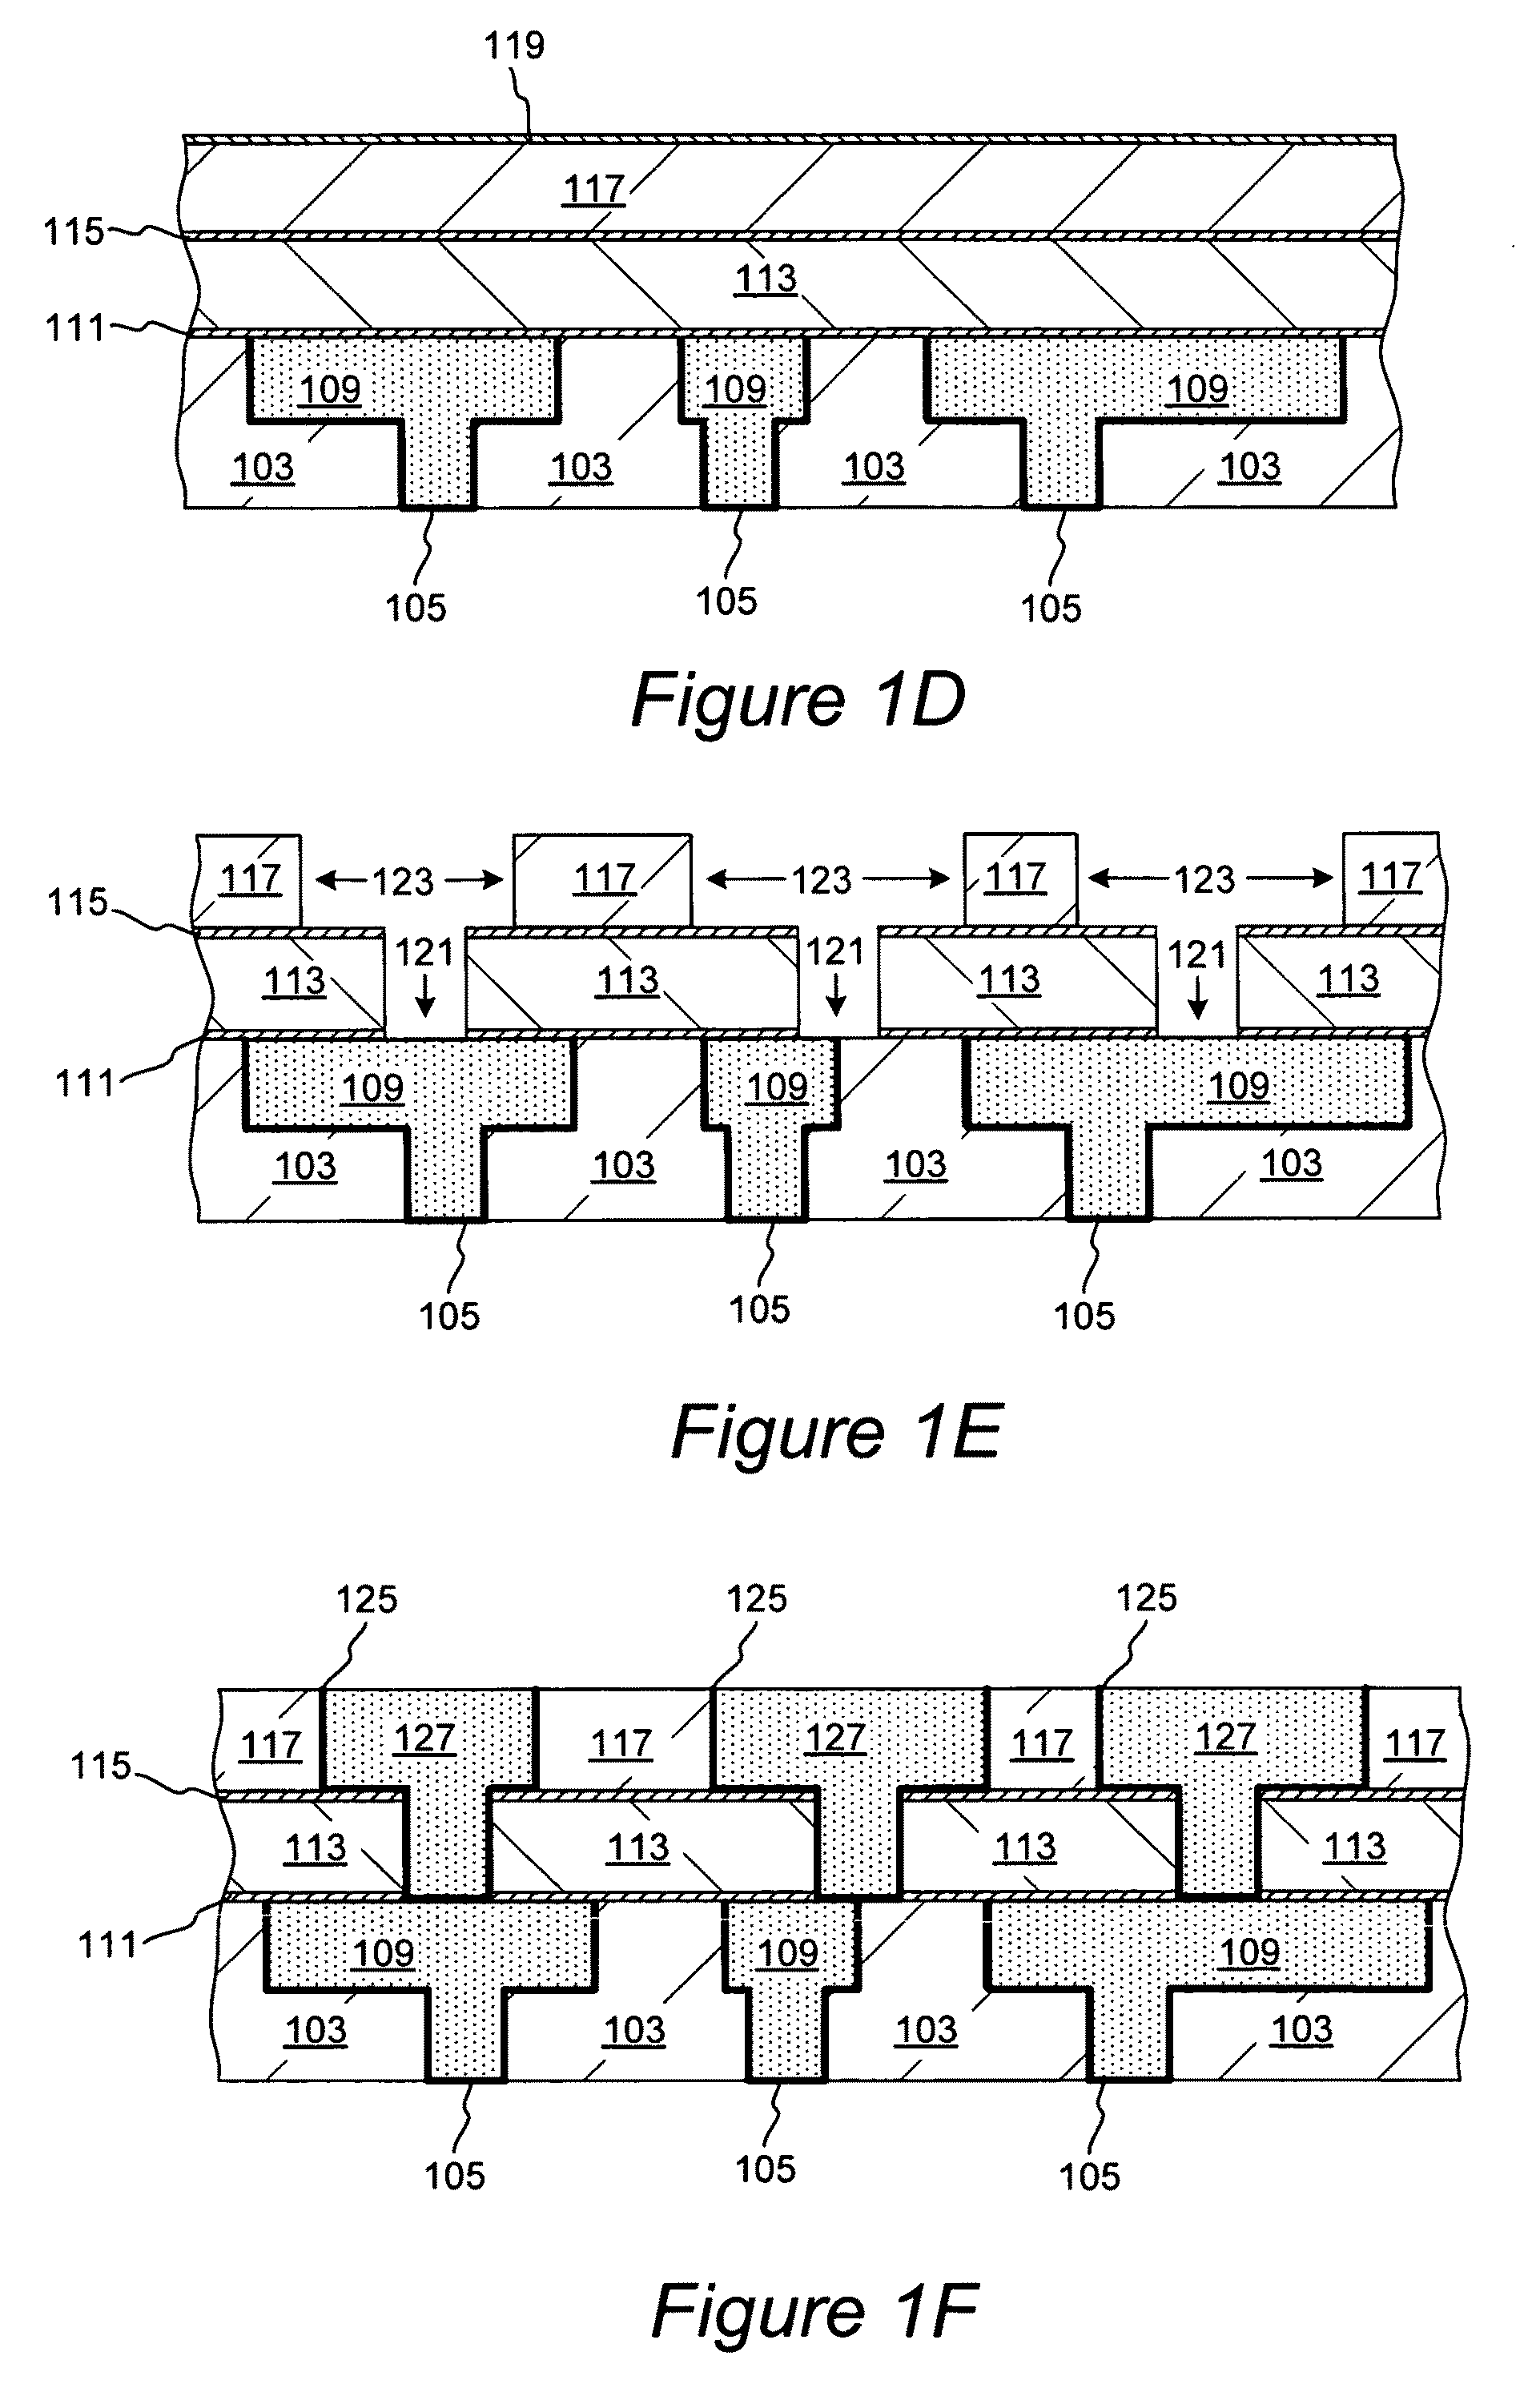 PVD-based metallization methods for fabrication of interconnections in semiconductor devices